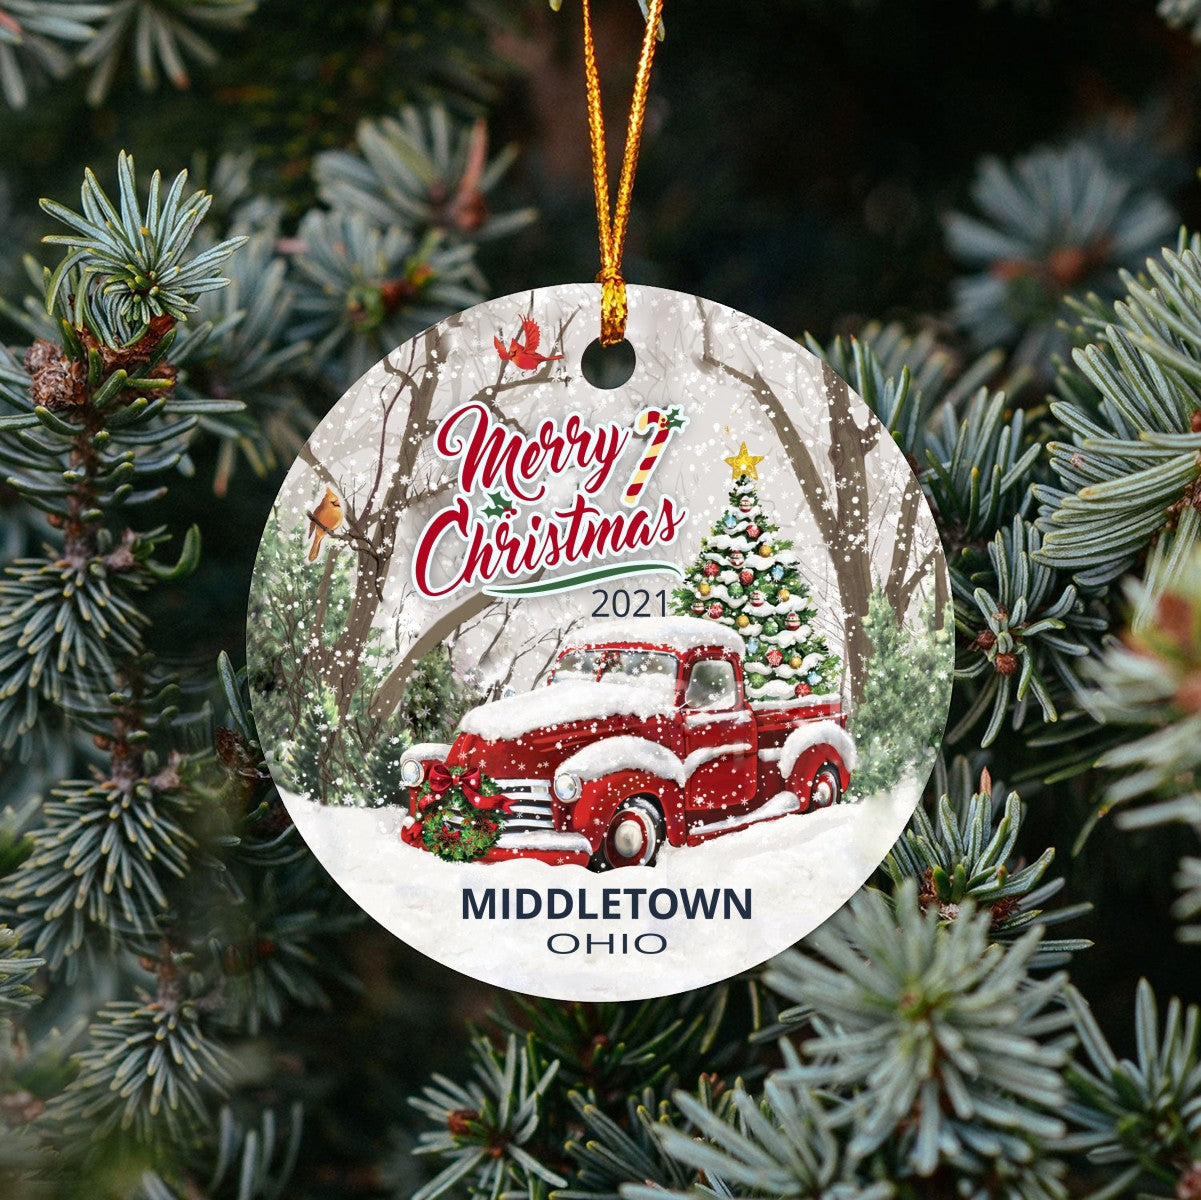 Christmas Tree Ornaments Middletown - Ornament Customize With Name City And State Middletown Ohio OH - Red Truck Xmas Ornaments 3'' Plastic Gift For Family, Friend And Housewarming